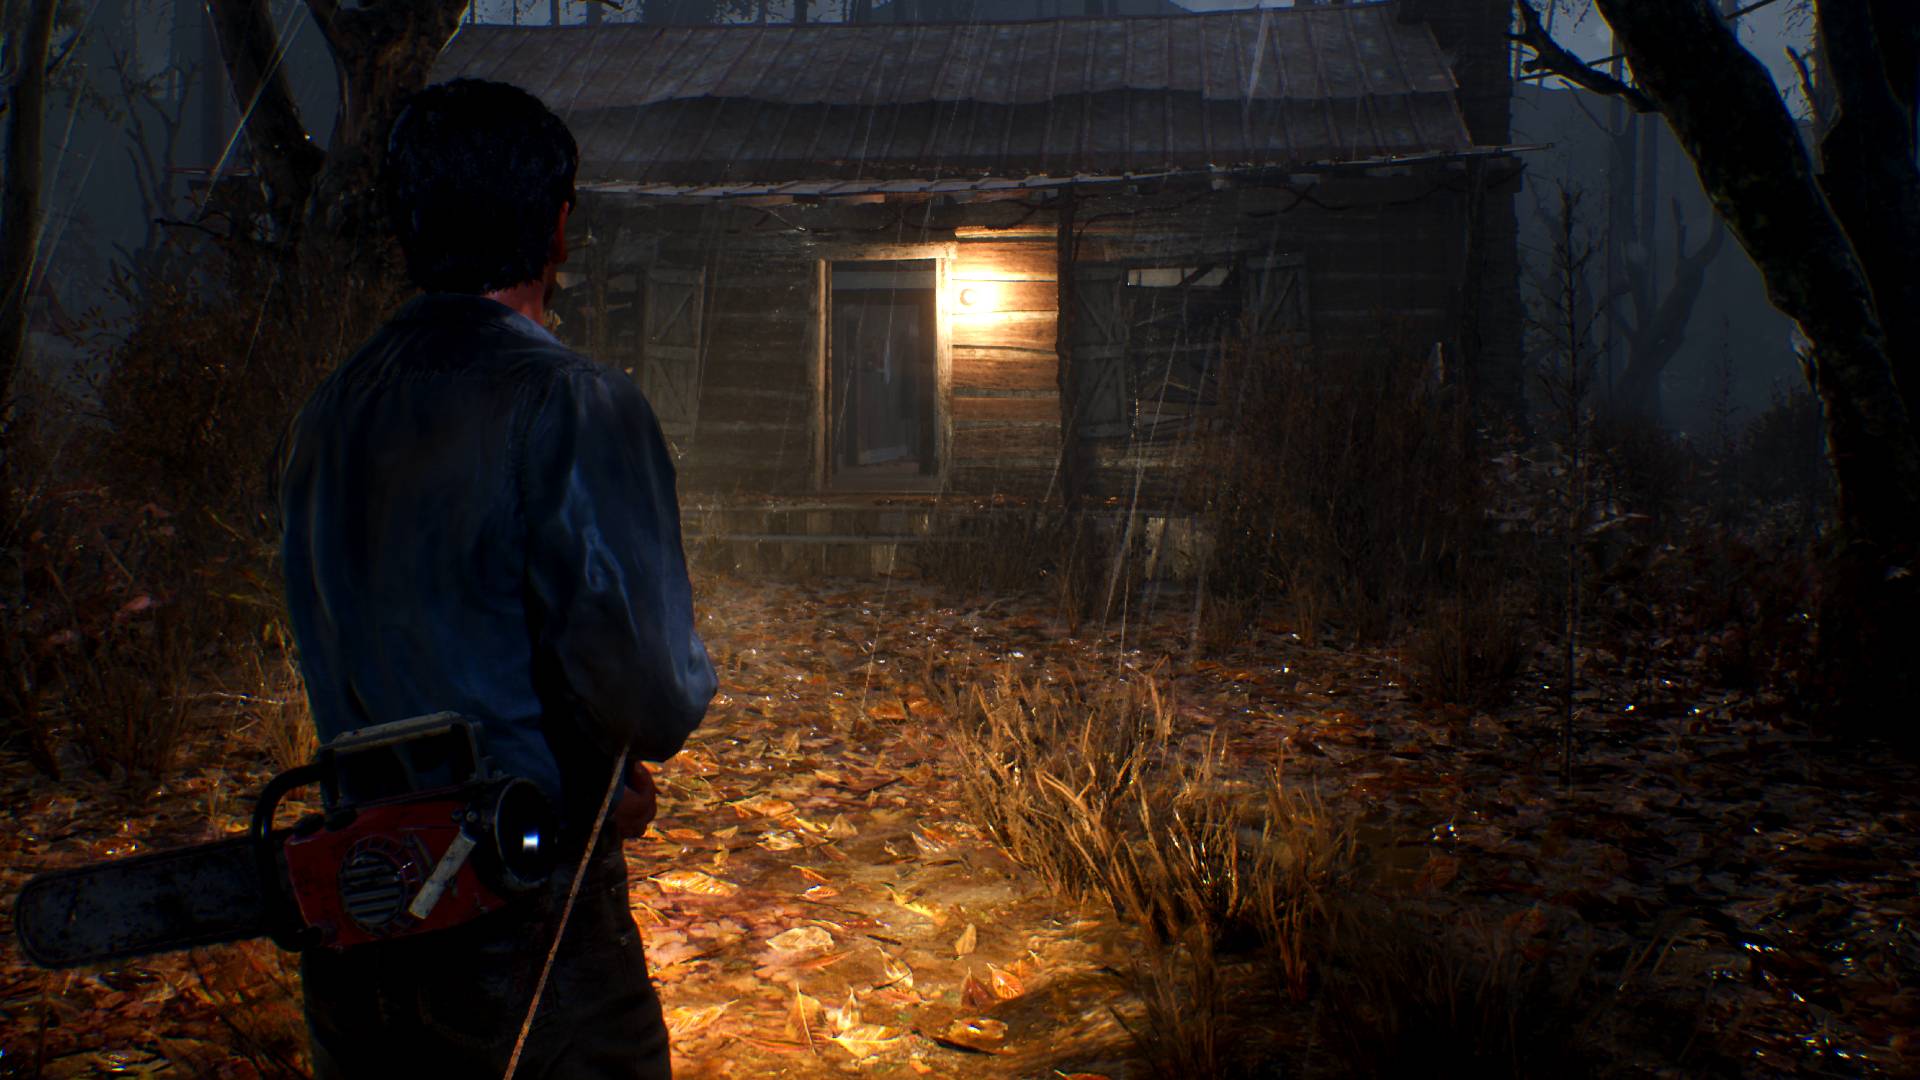 Evil Dead: The Game Single-Player Review  .